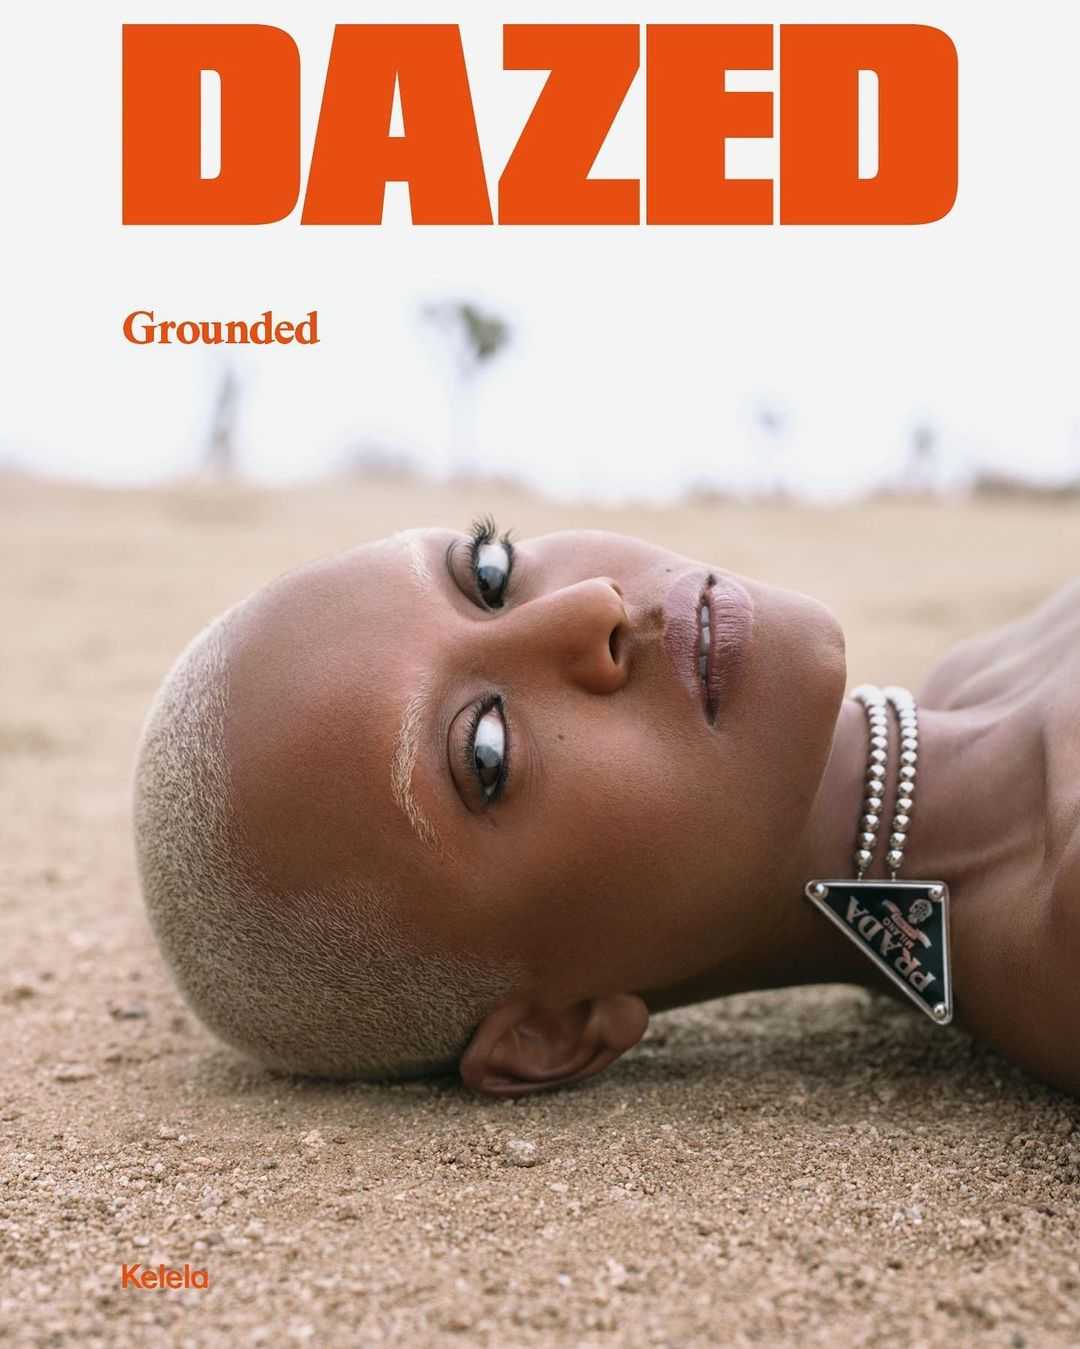 Dazed - The Age of Imagination Issue - 4463